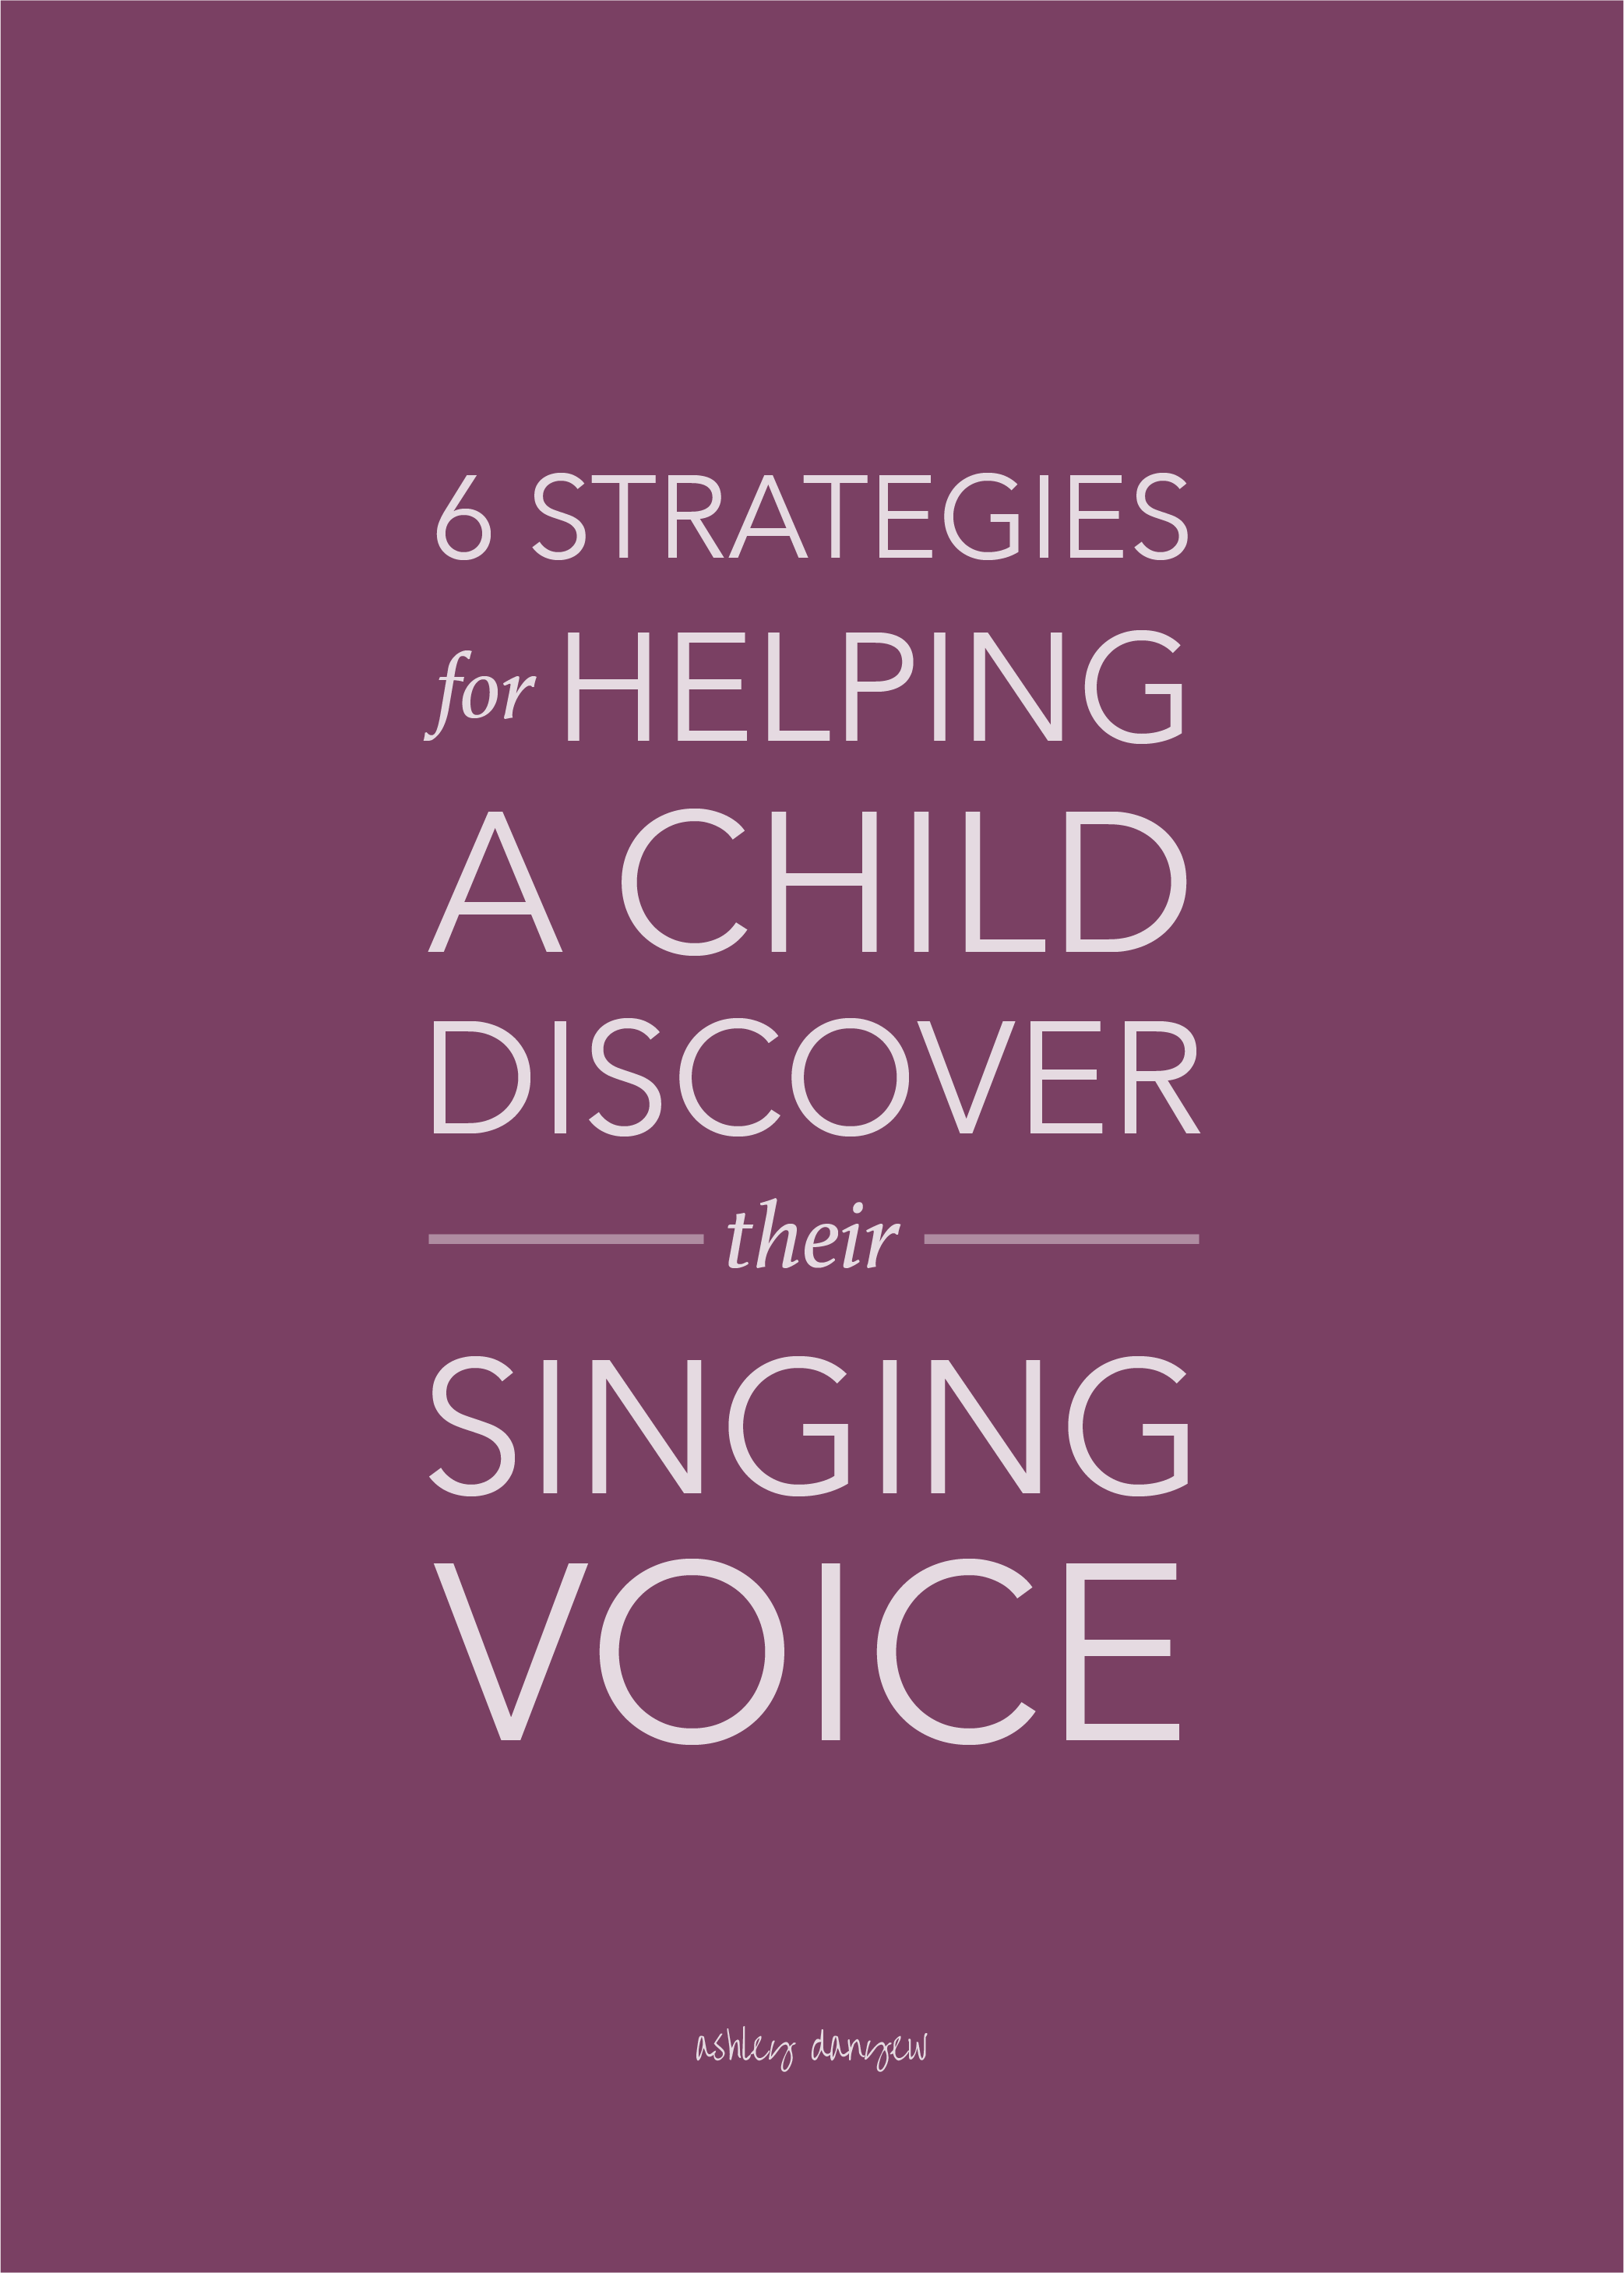 6 Strategies for Helping a Child Discover Their Singing Voice